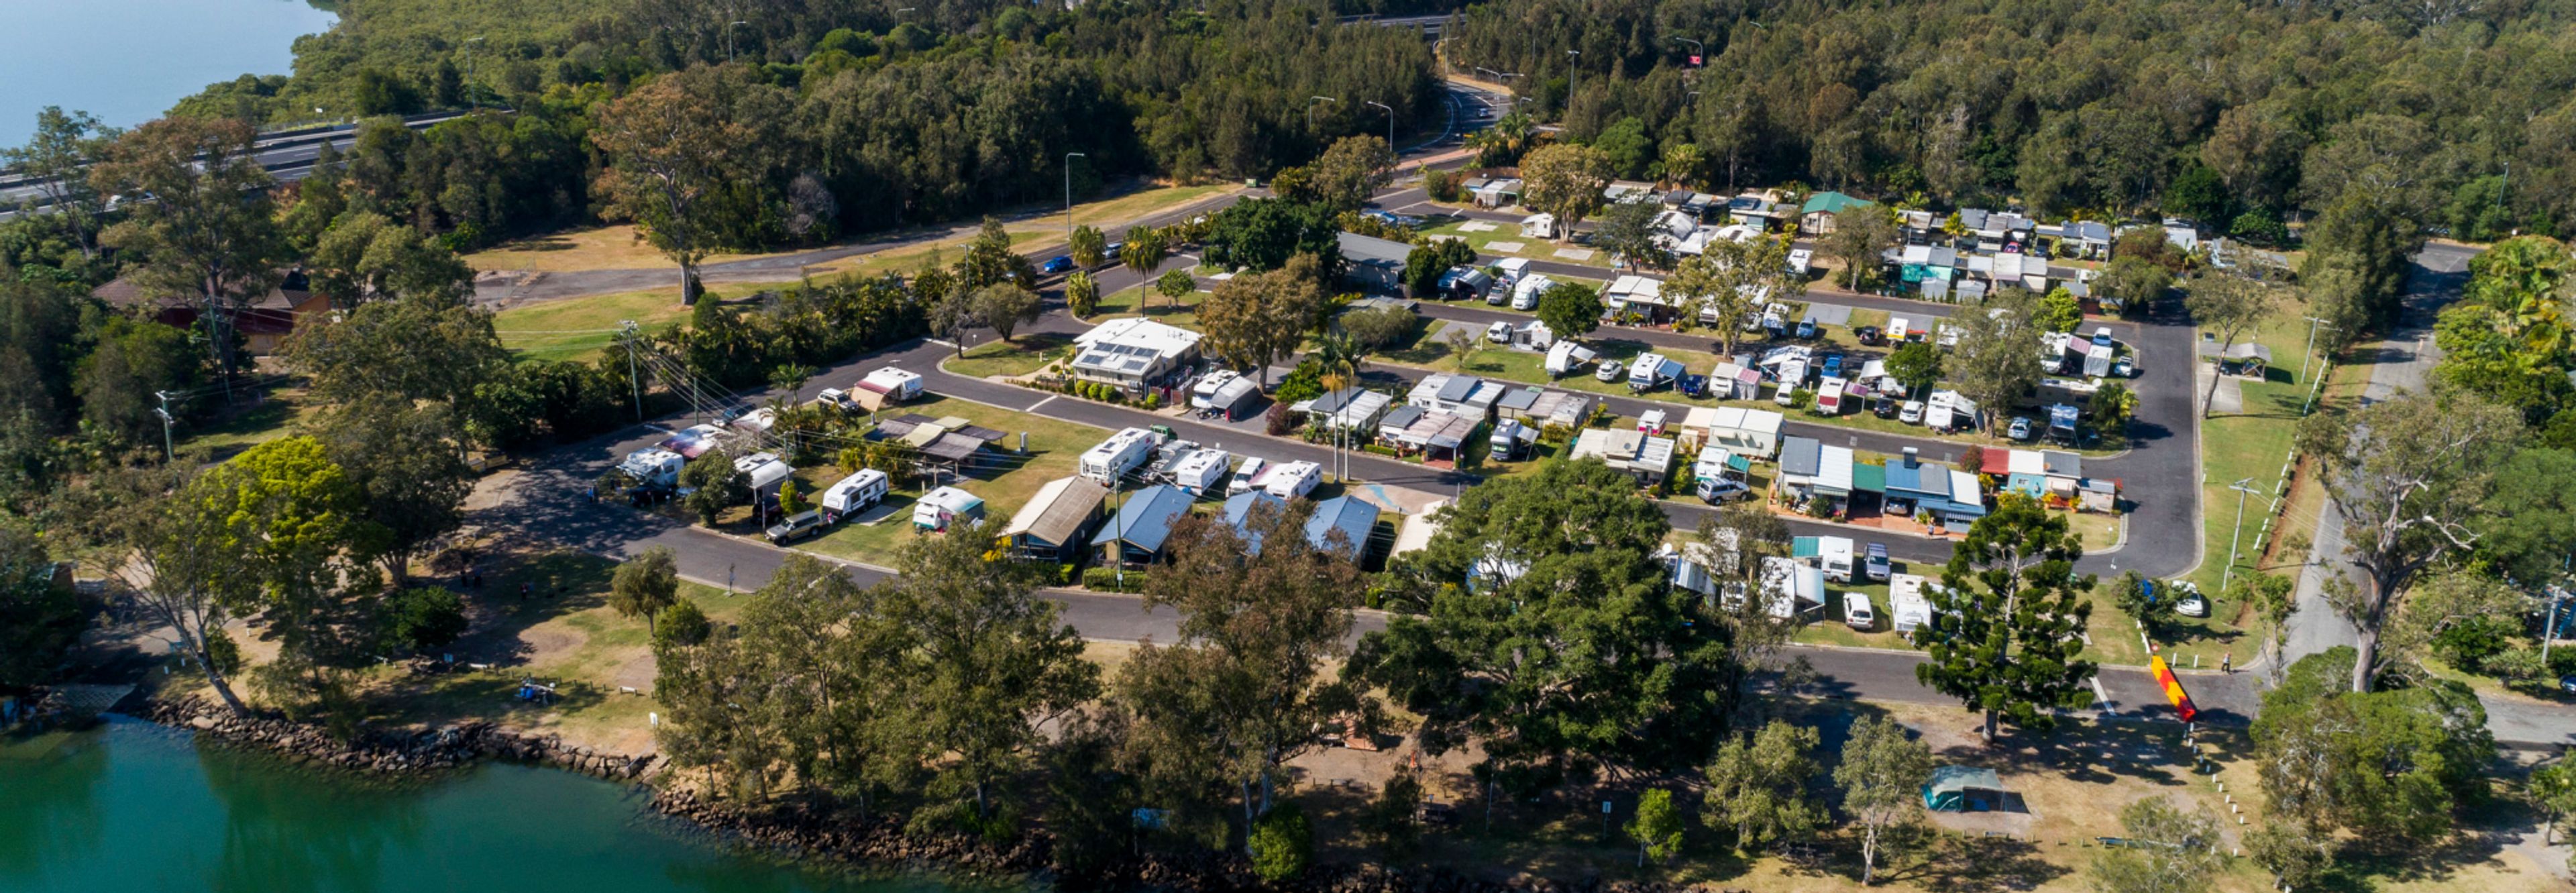 Reflections Holidays Ferry Reserve holiday & caravan Ferry Reserve Drone photo